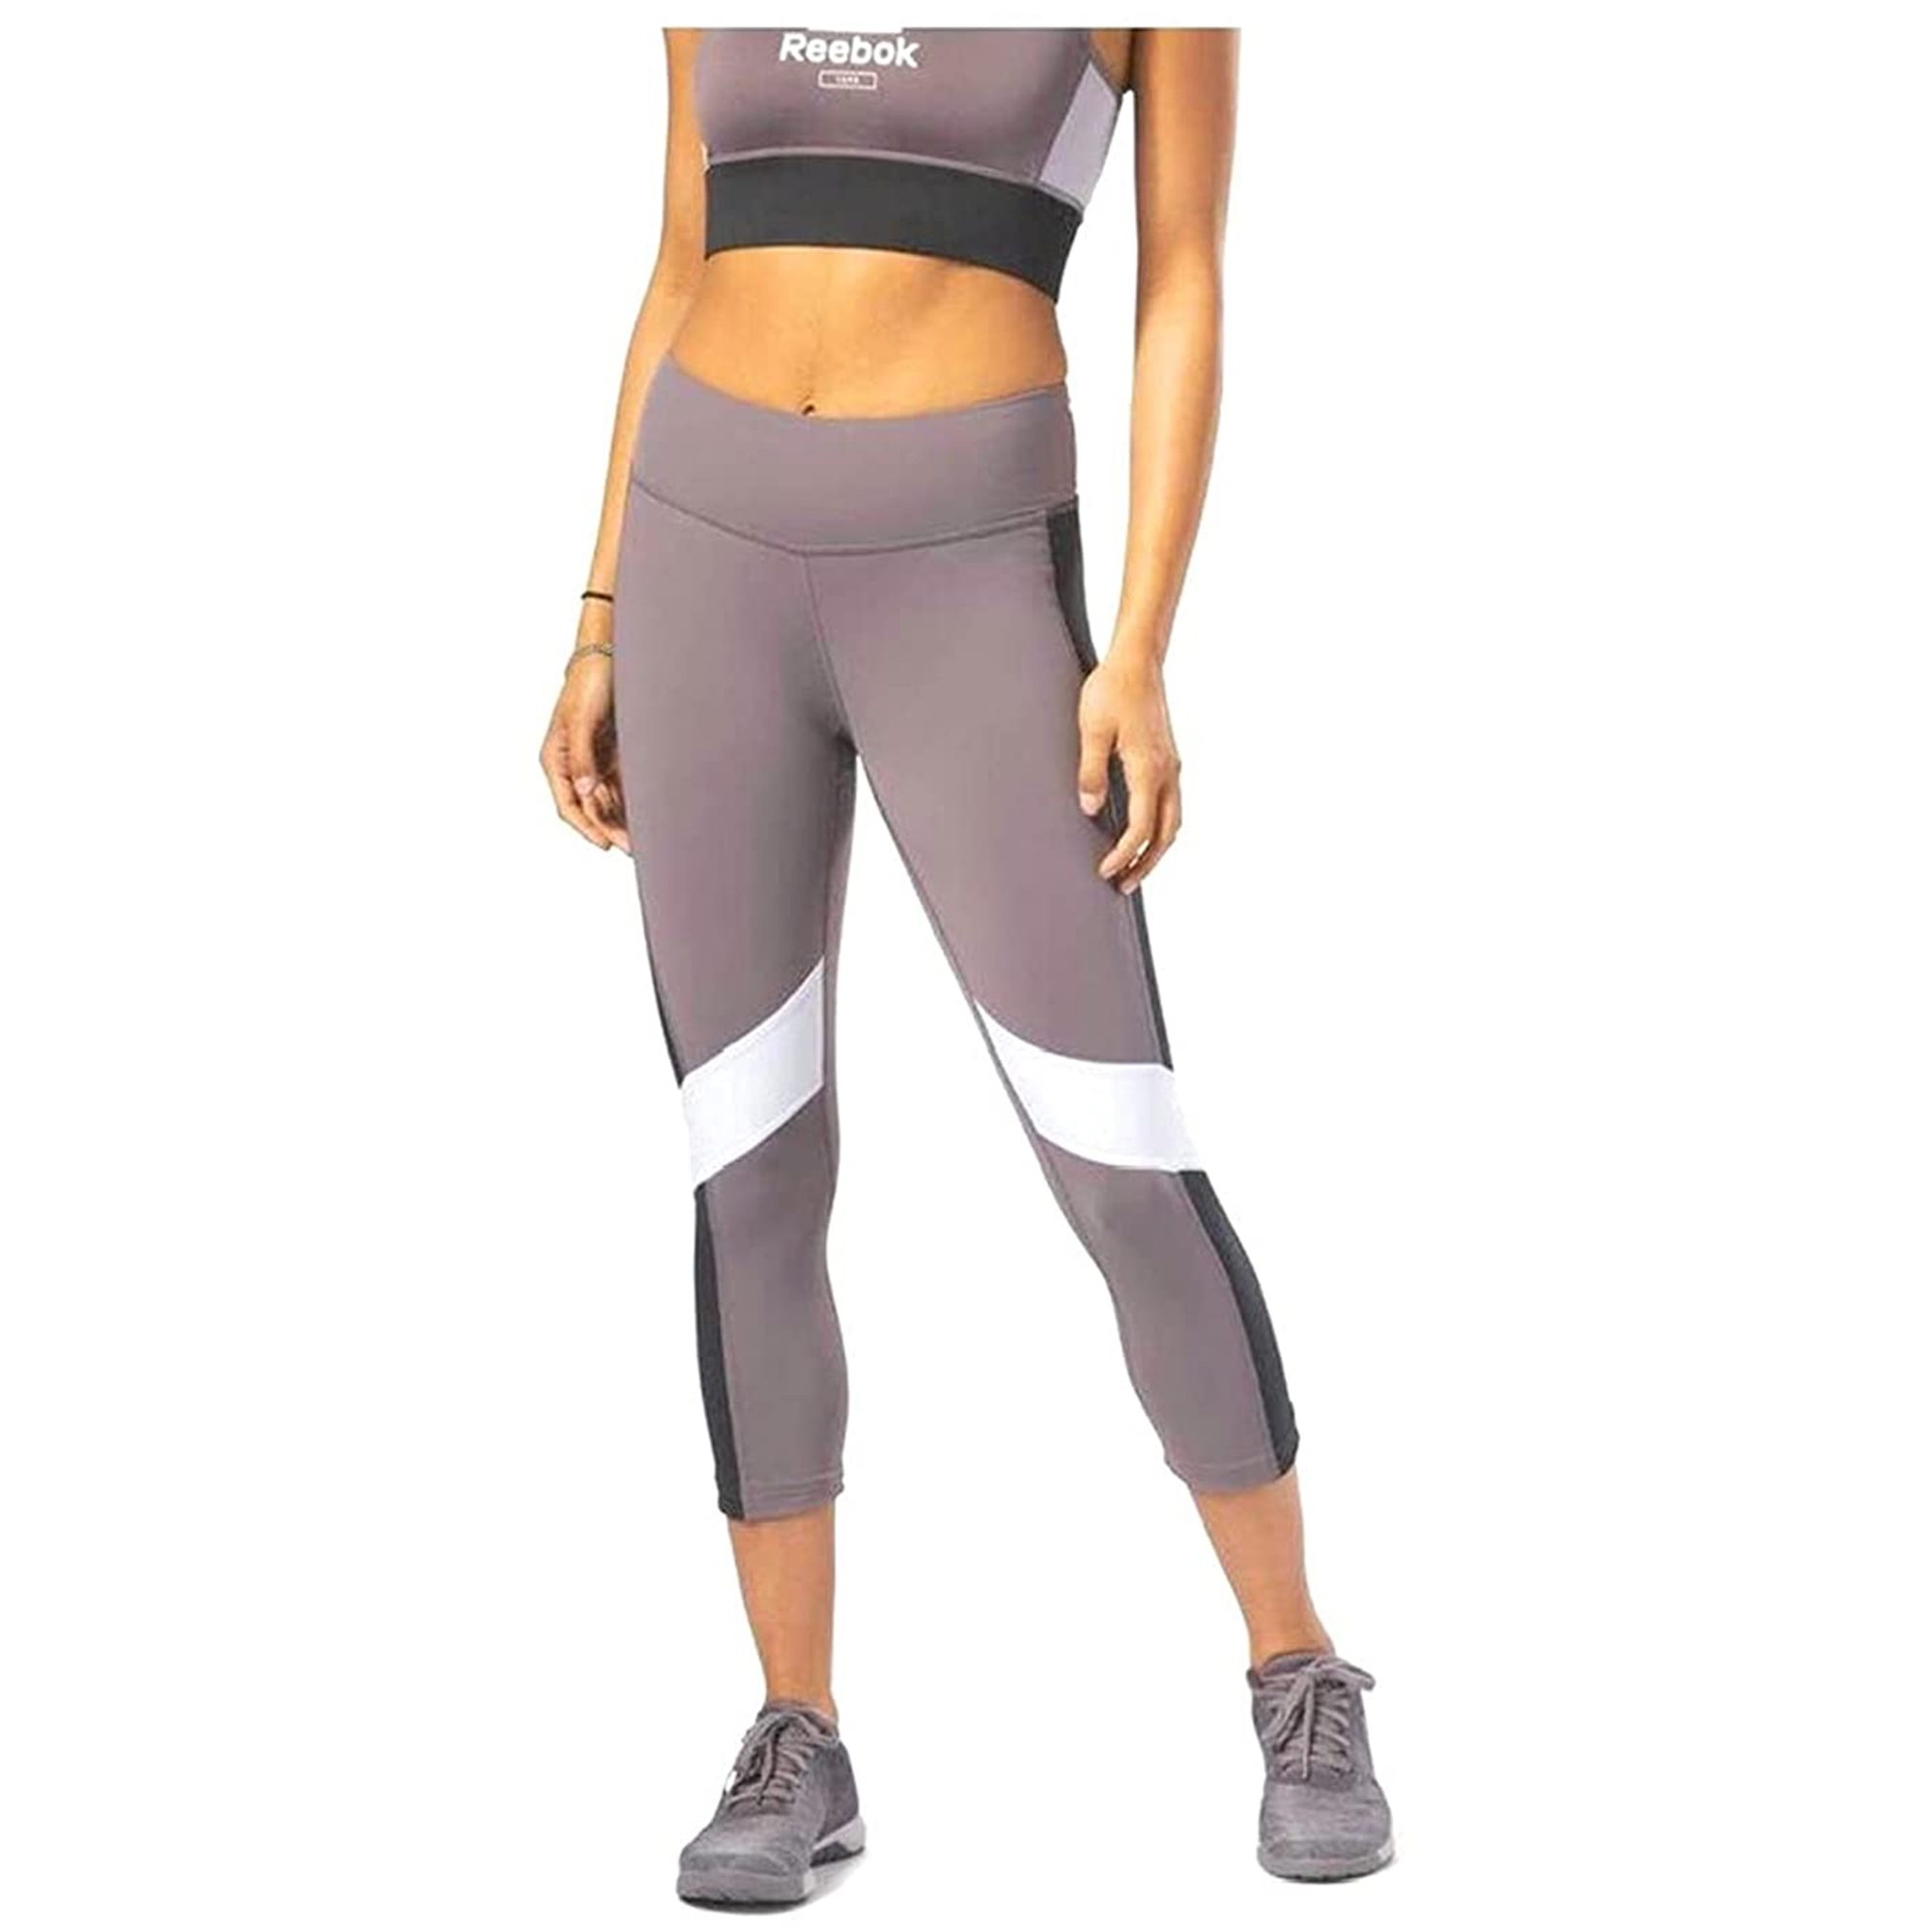 Buy a Reebok Womens Lux Color Block Compression Athletic Pants